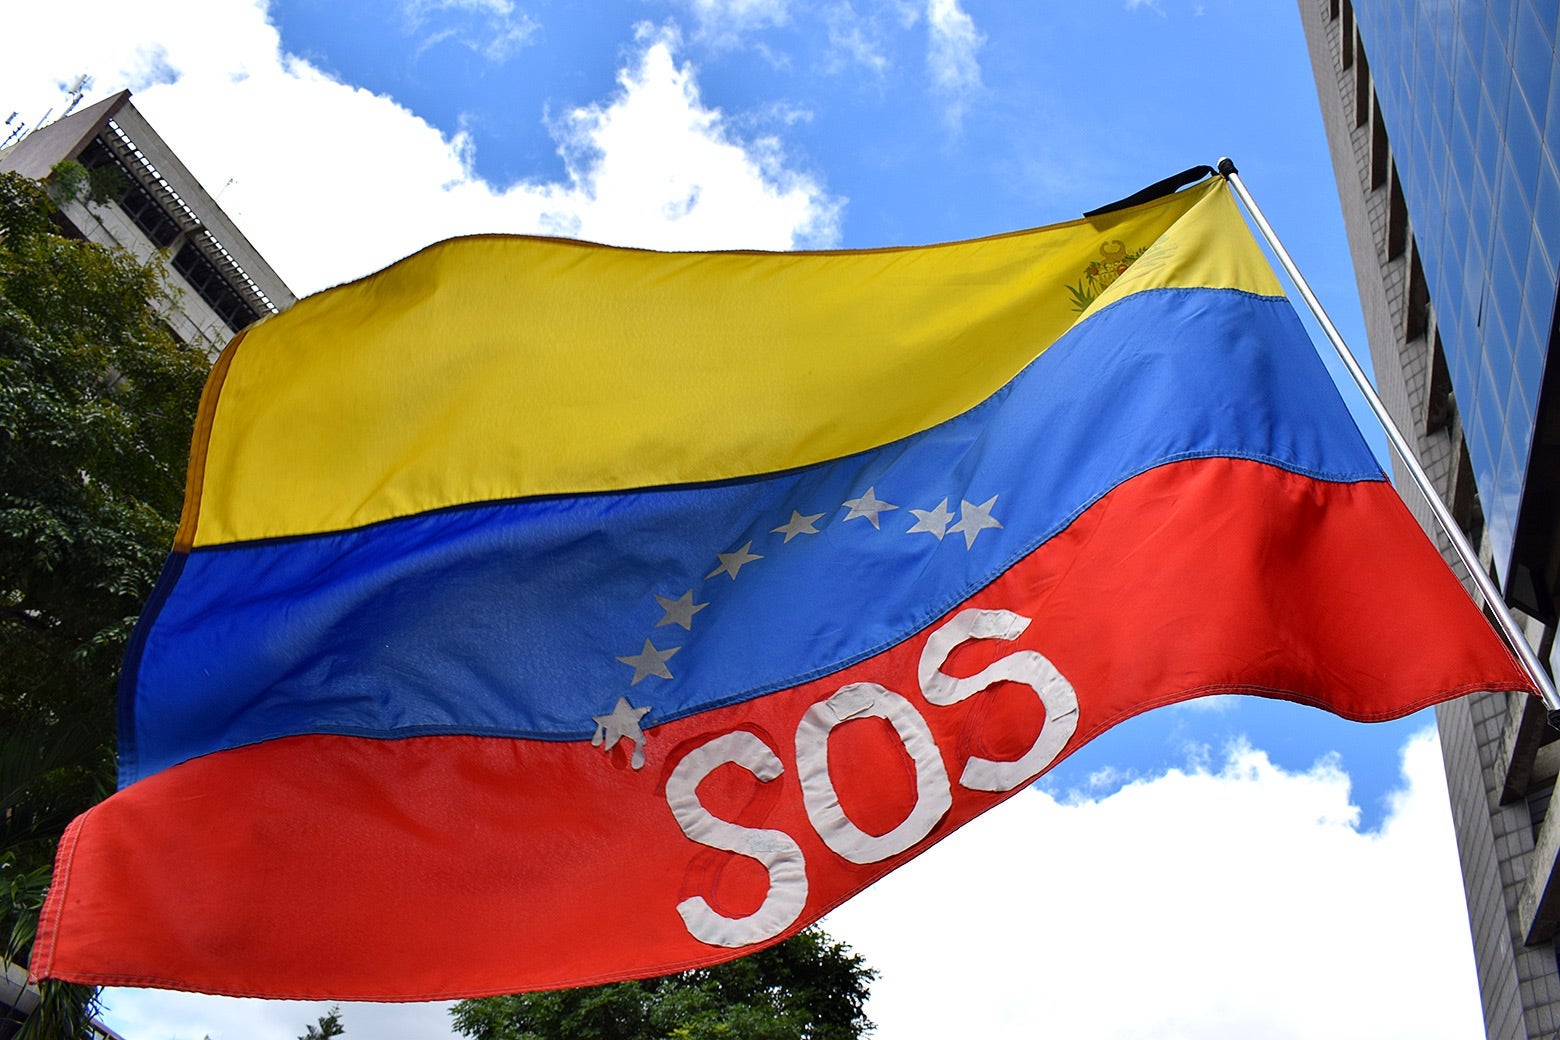 An SOS flag flies above protesters at a July 2019 march in Caracas.